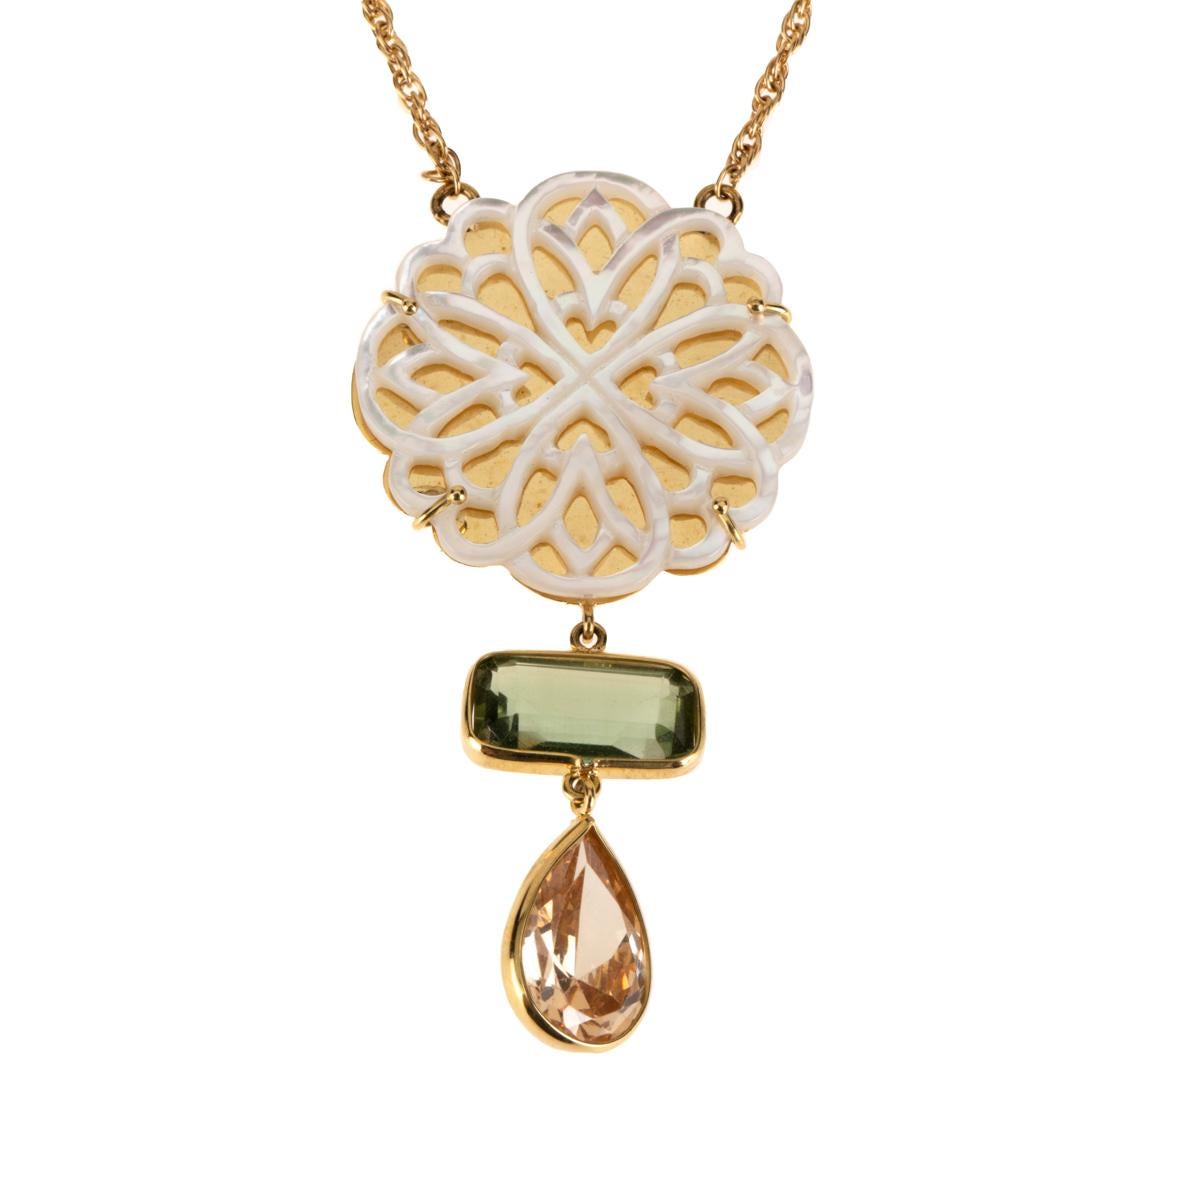 18 kt Gold gr 14,70, rare Green Amethyst, Opal Drop, and carved Mother of pearl lied in a Gold mirror plate that reflecting light.
All Giulia Colussi jewelry is new and has never been previously owned or worn. Each item will arrive at your door